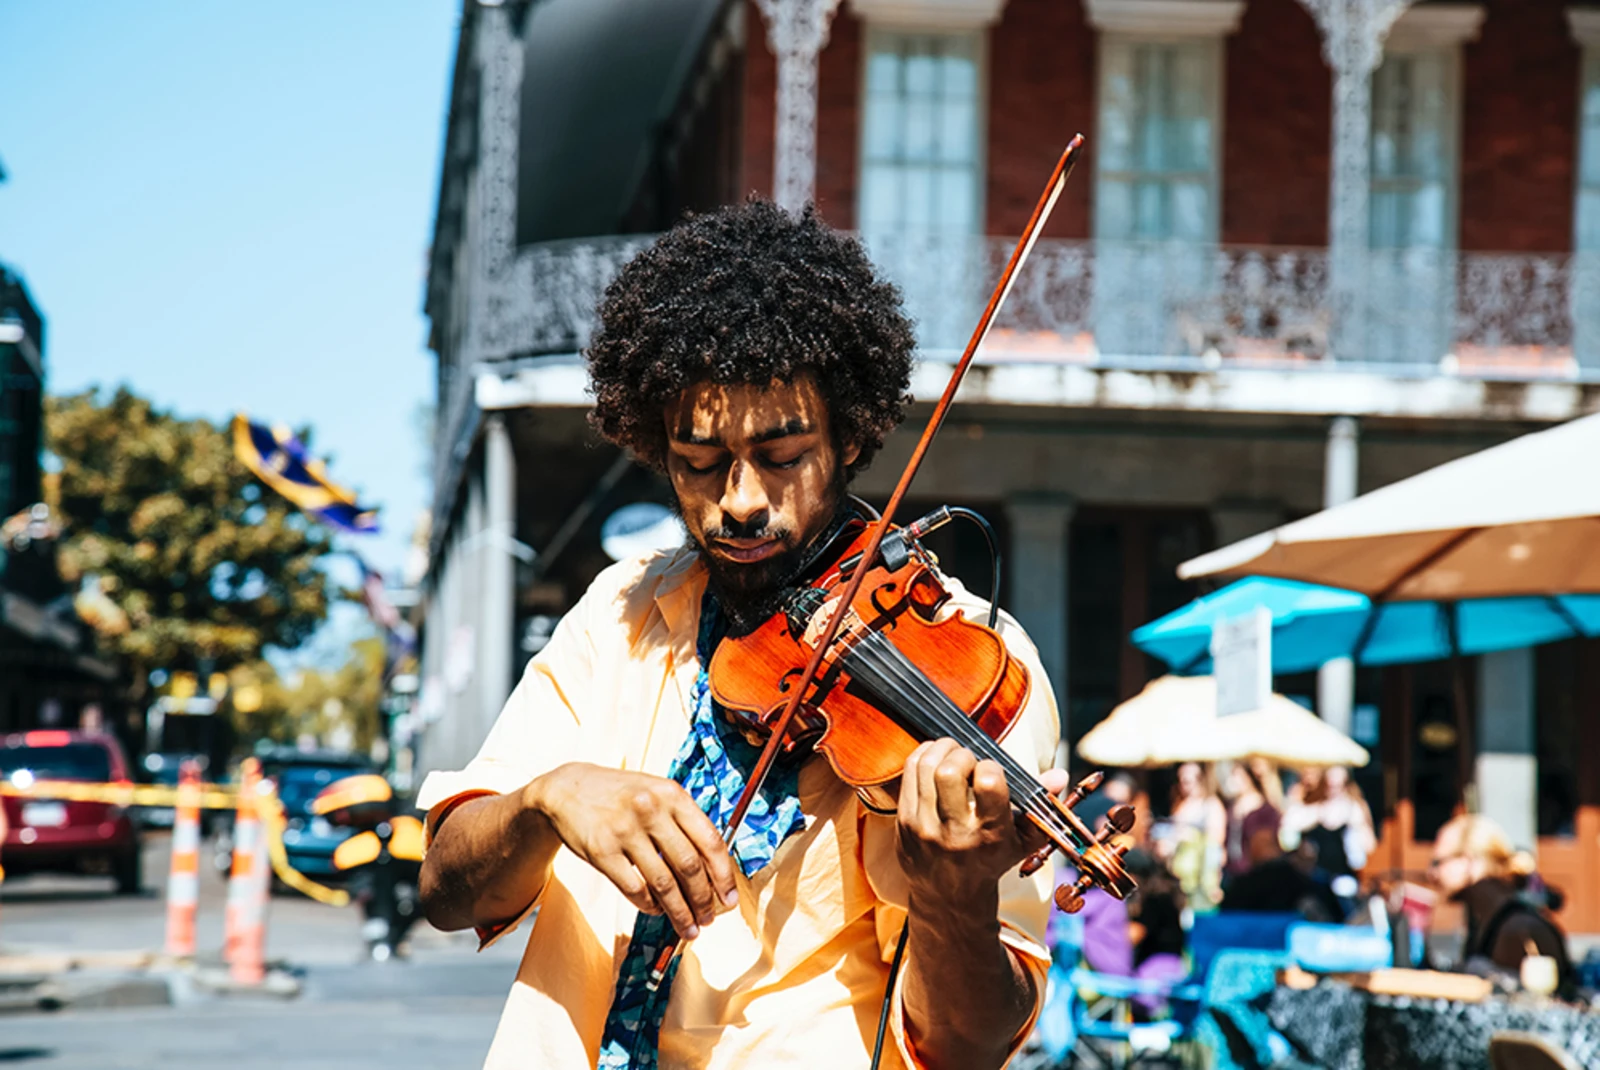 street performer playing the violin in new orleans louisiana 